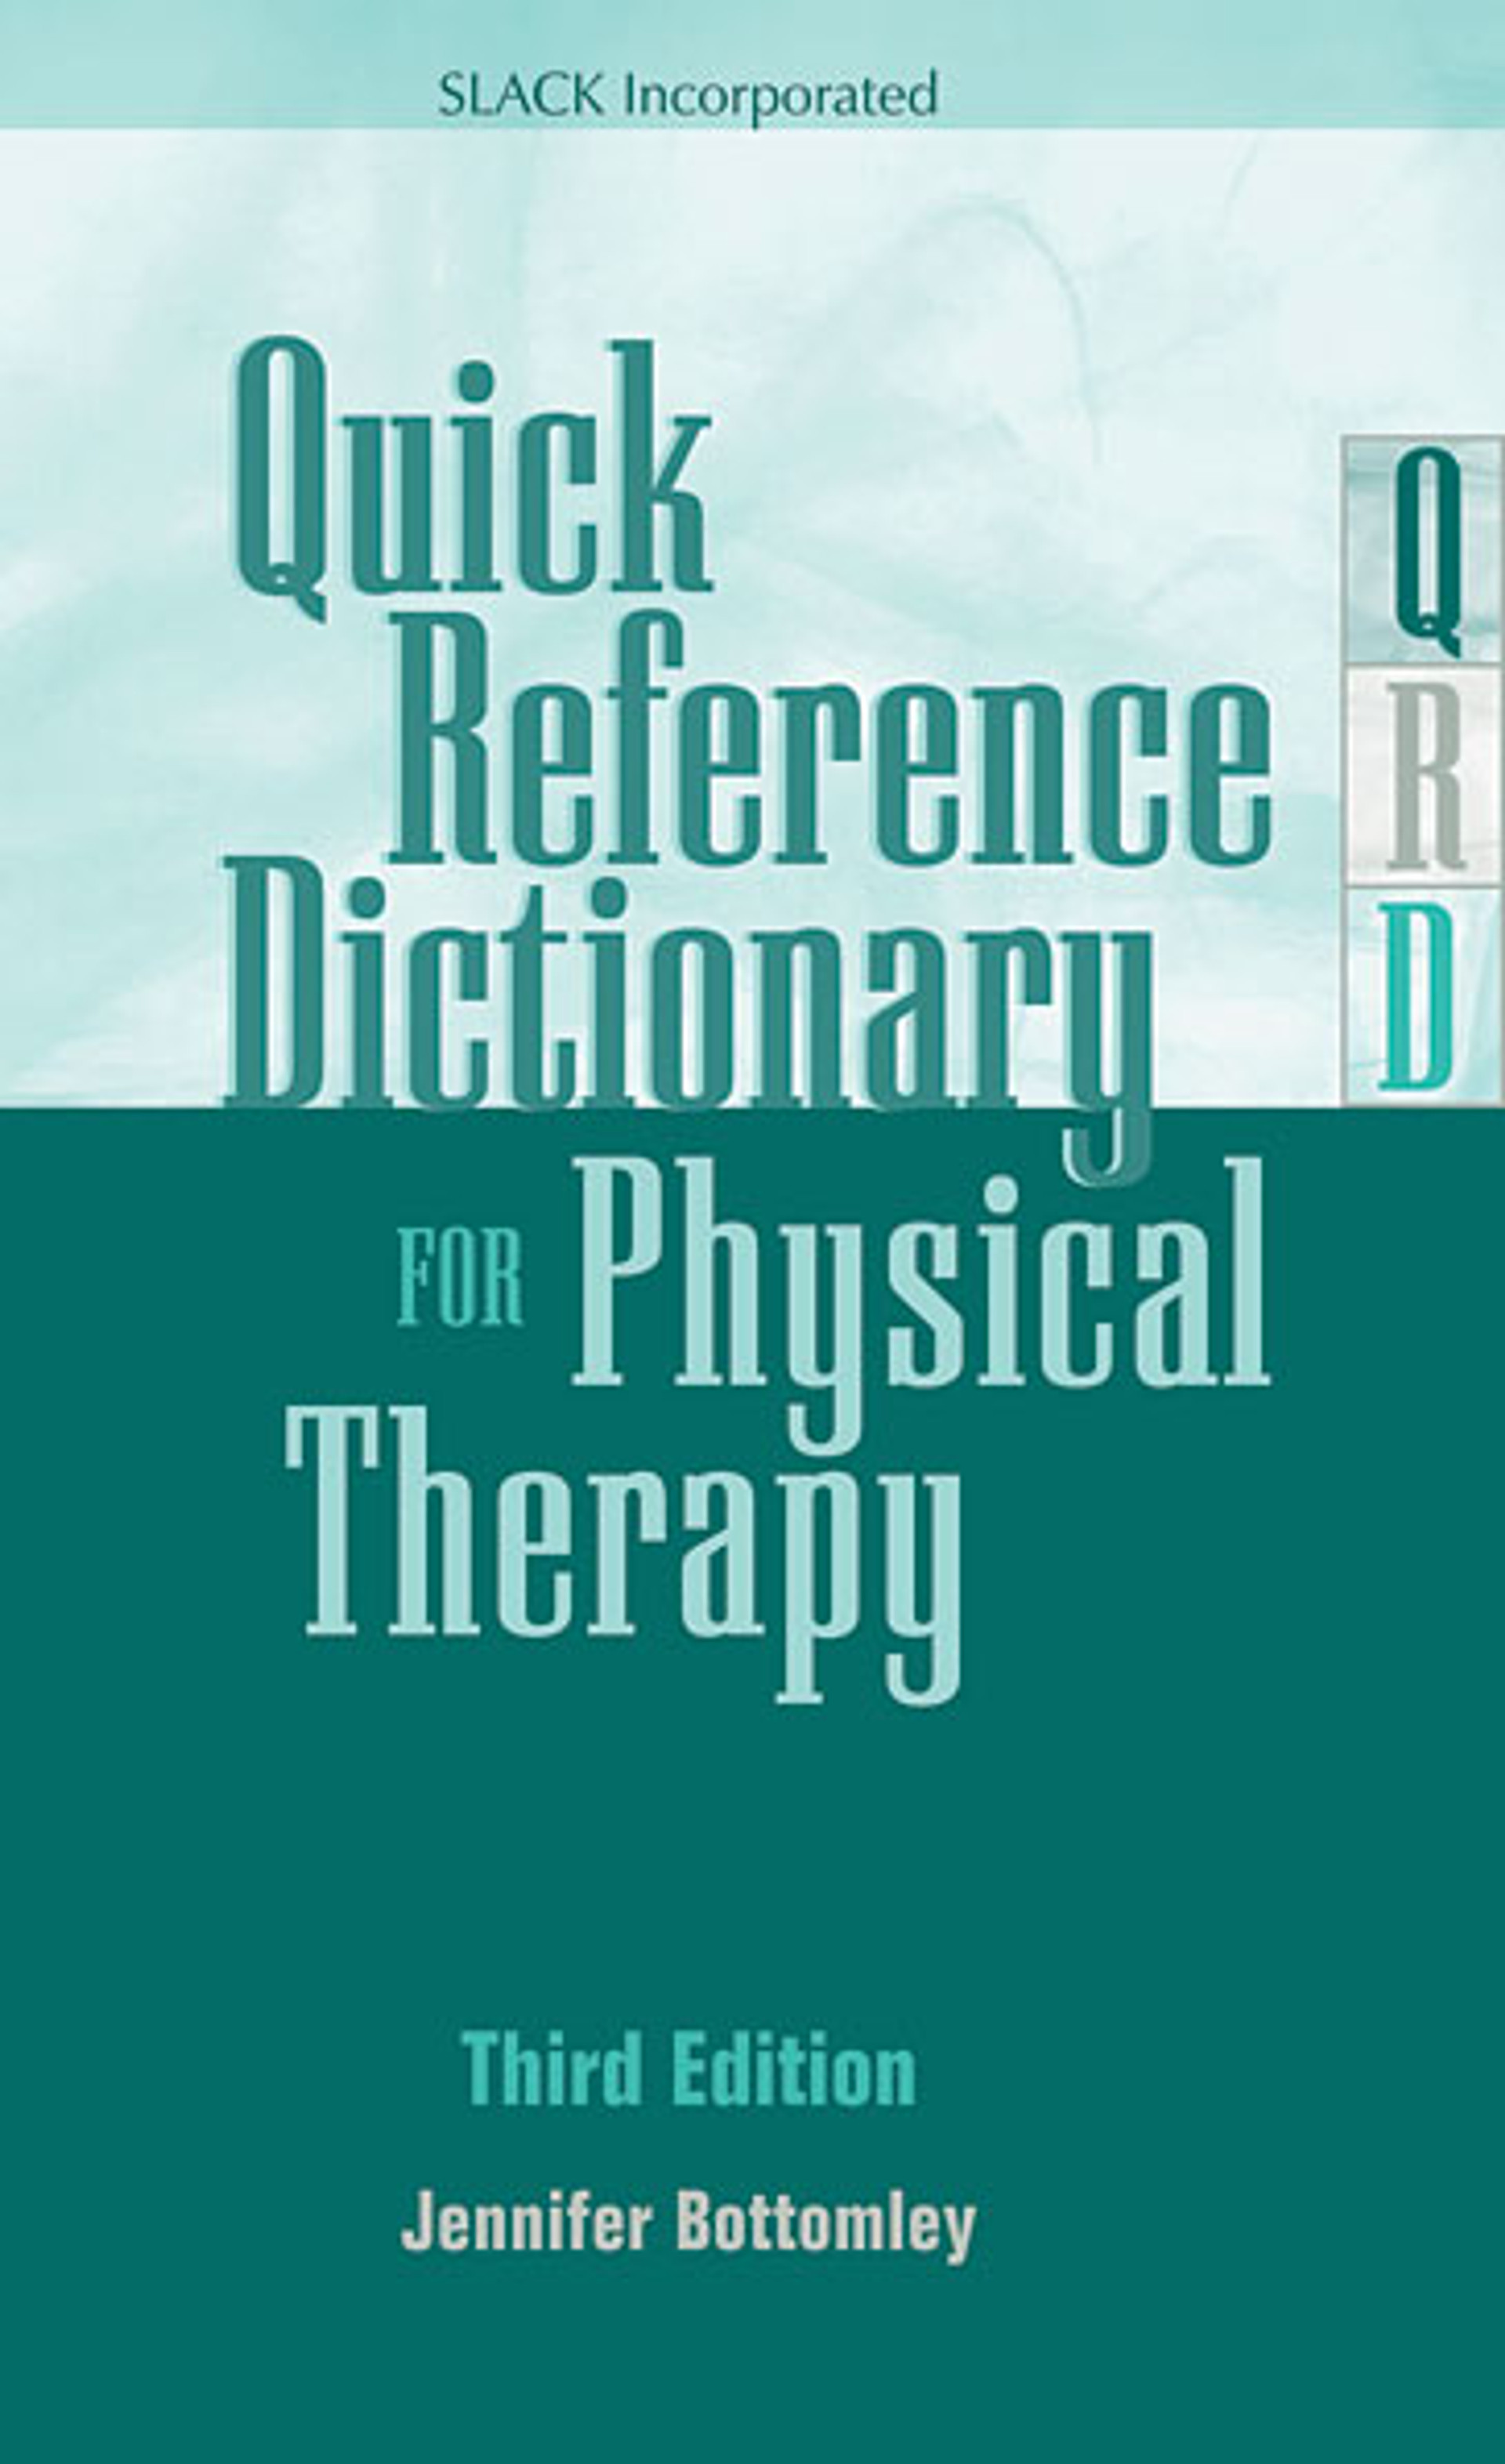 Quick Reference Dictionary For Physical Therapy Third Edition Slack Books 9265